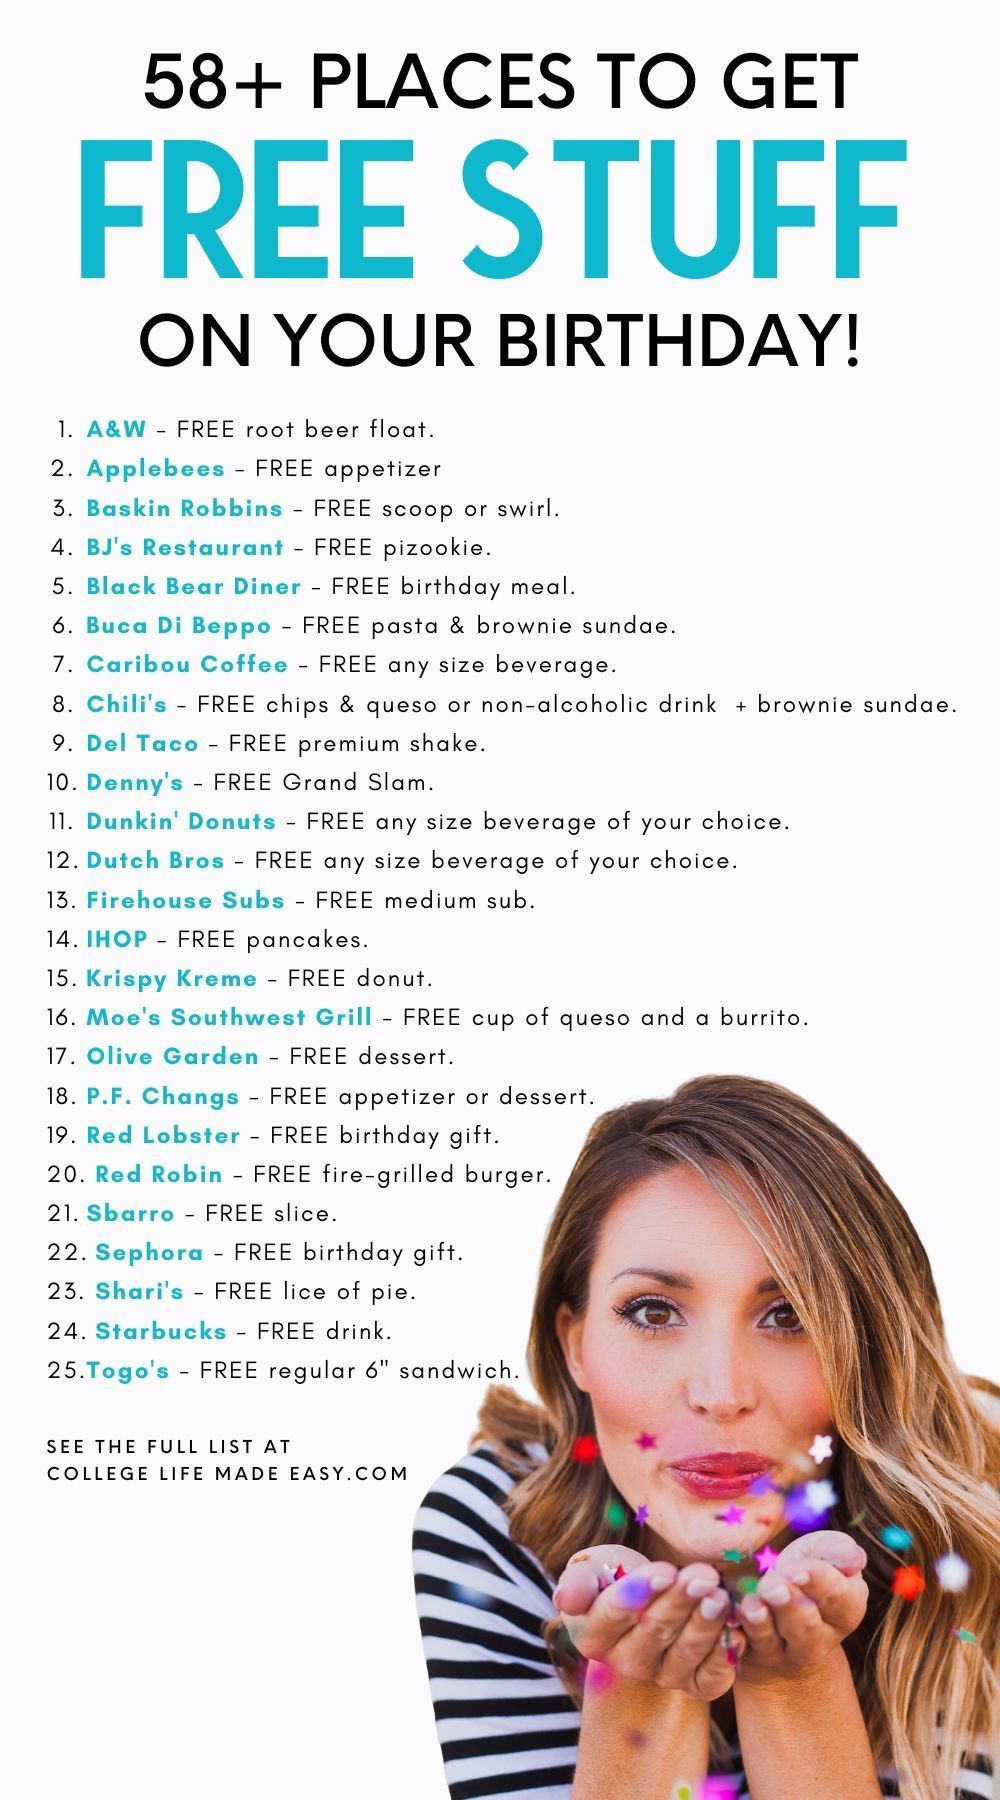 58+ Freebies to Score on Your Birthday